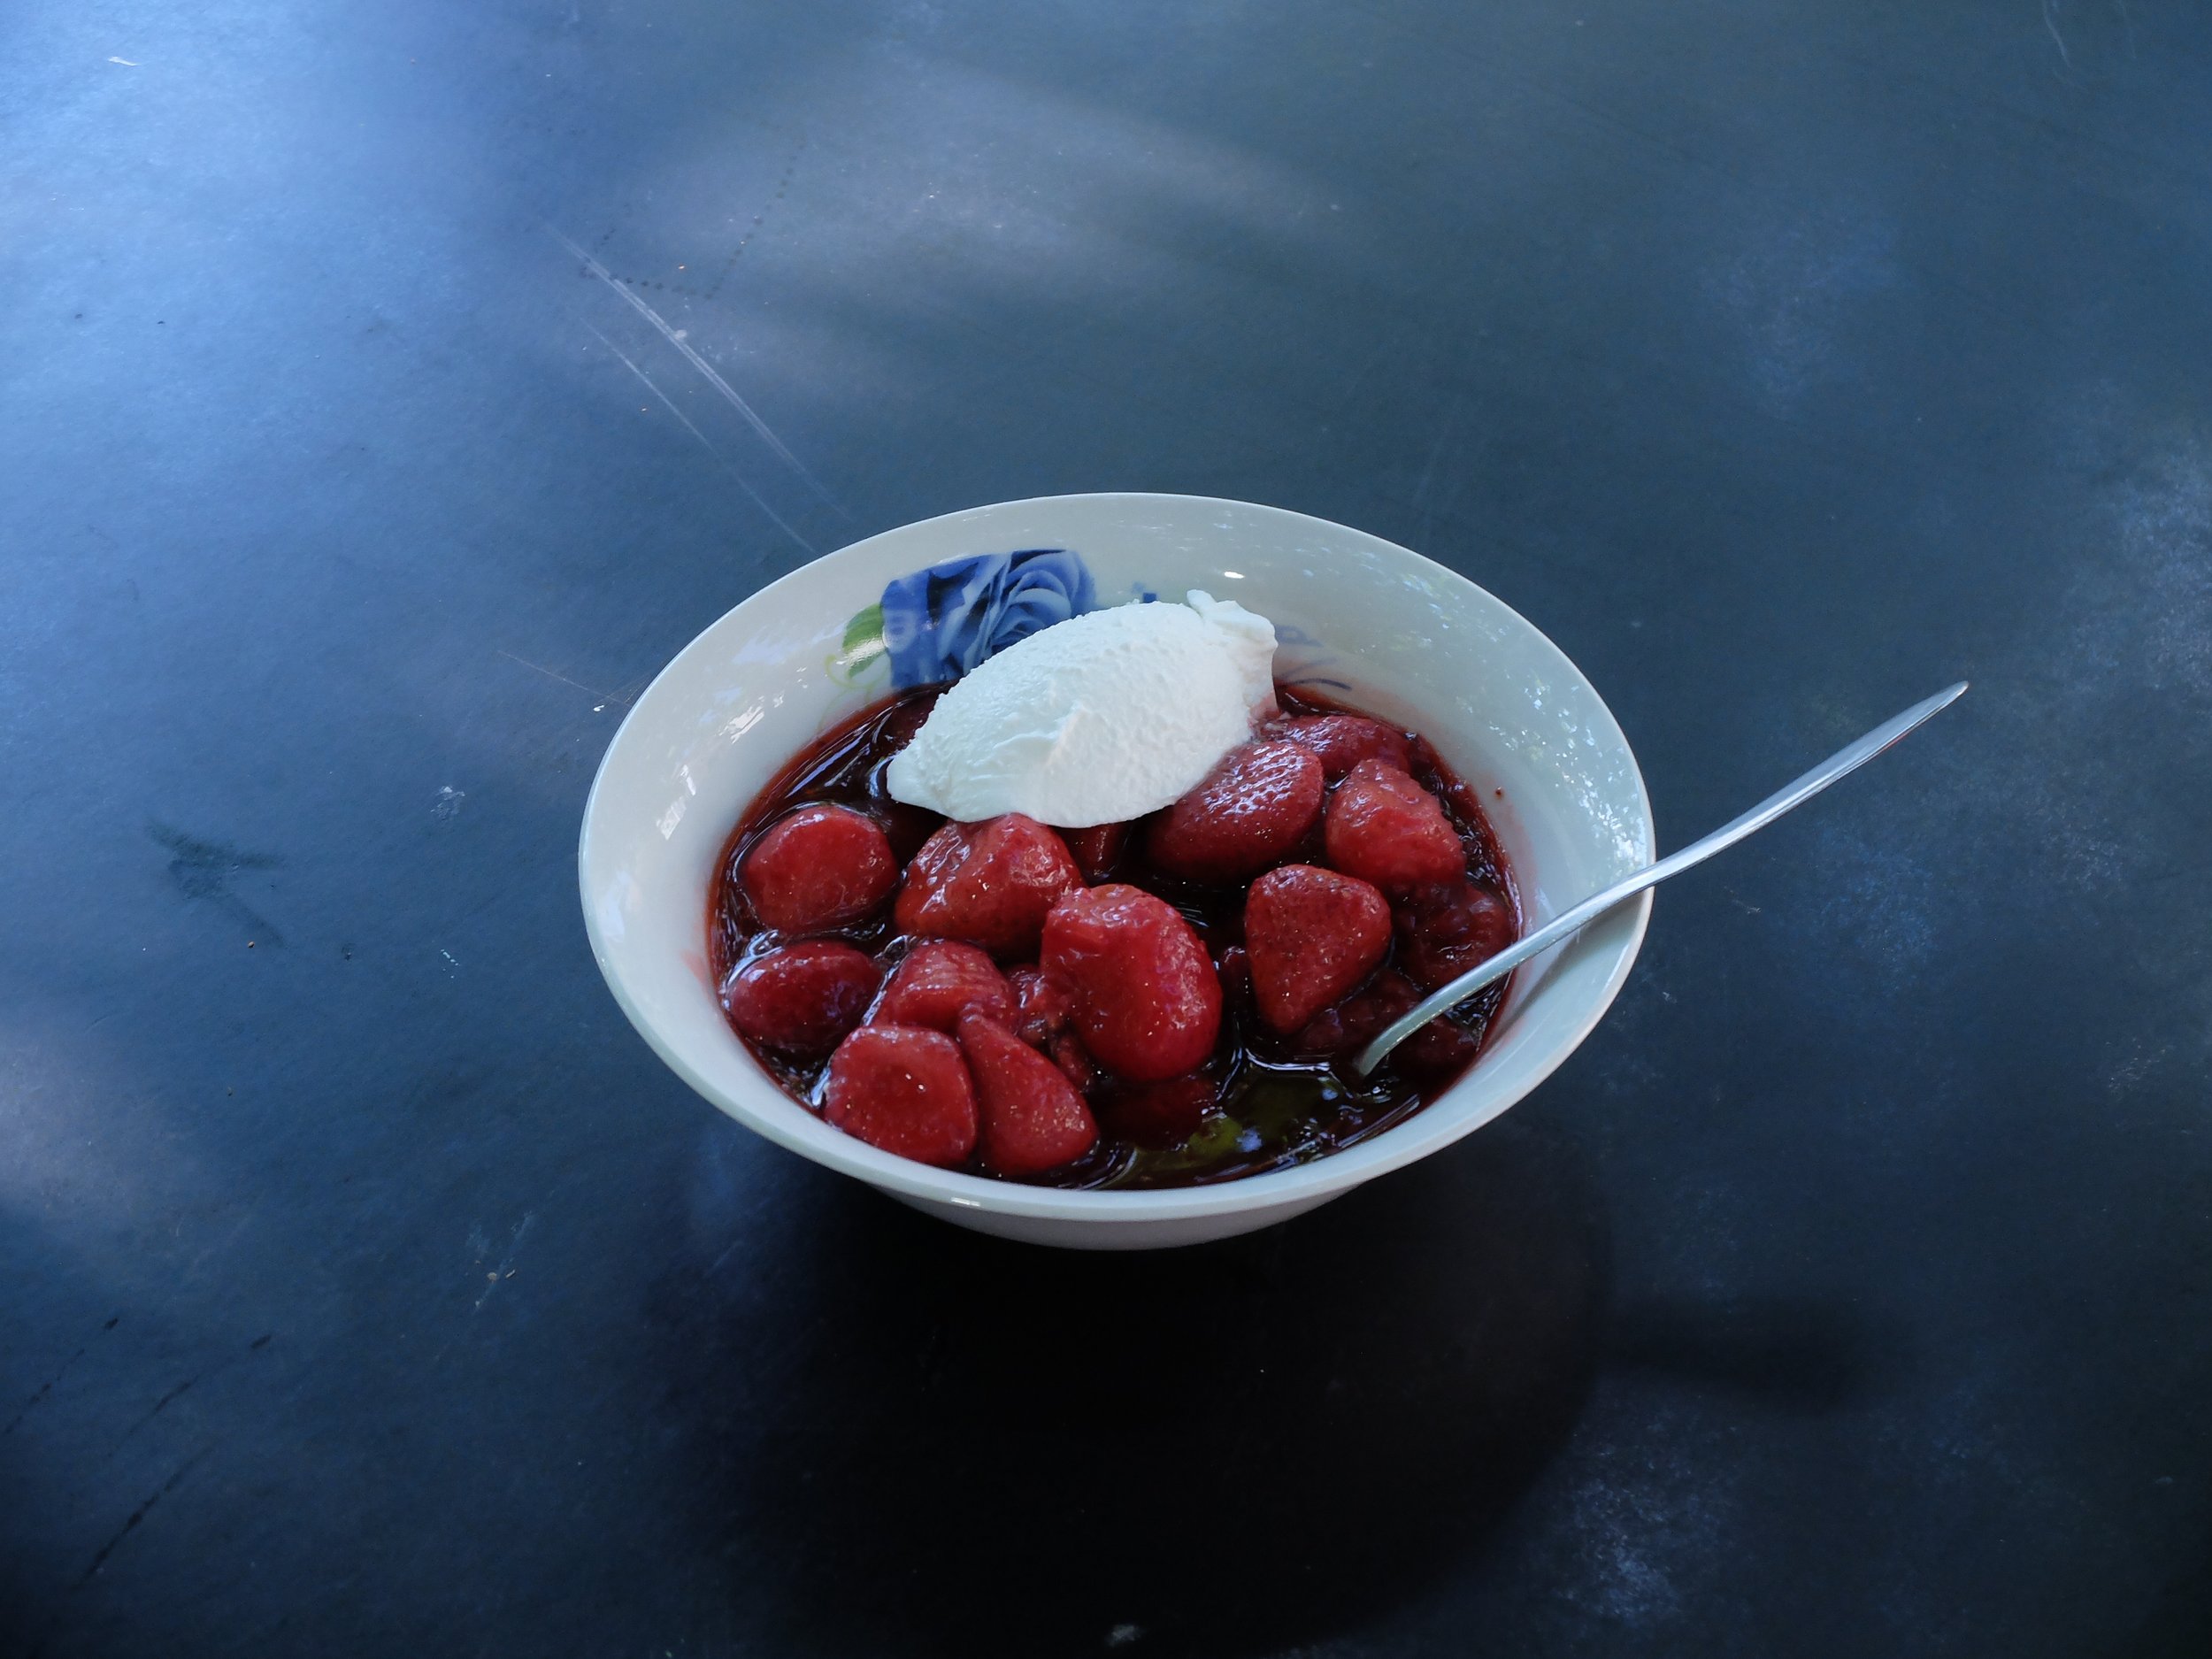   Lone Haugaard Madsen, Recipe: Fresh strawberries cooked with sugar eaten warm with cold cream on a plate with a blue drawing, ceramic bowl with a blue rose from baba Vasa's kitchen, cooked by Laurenz  